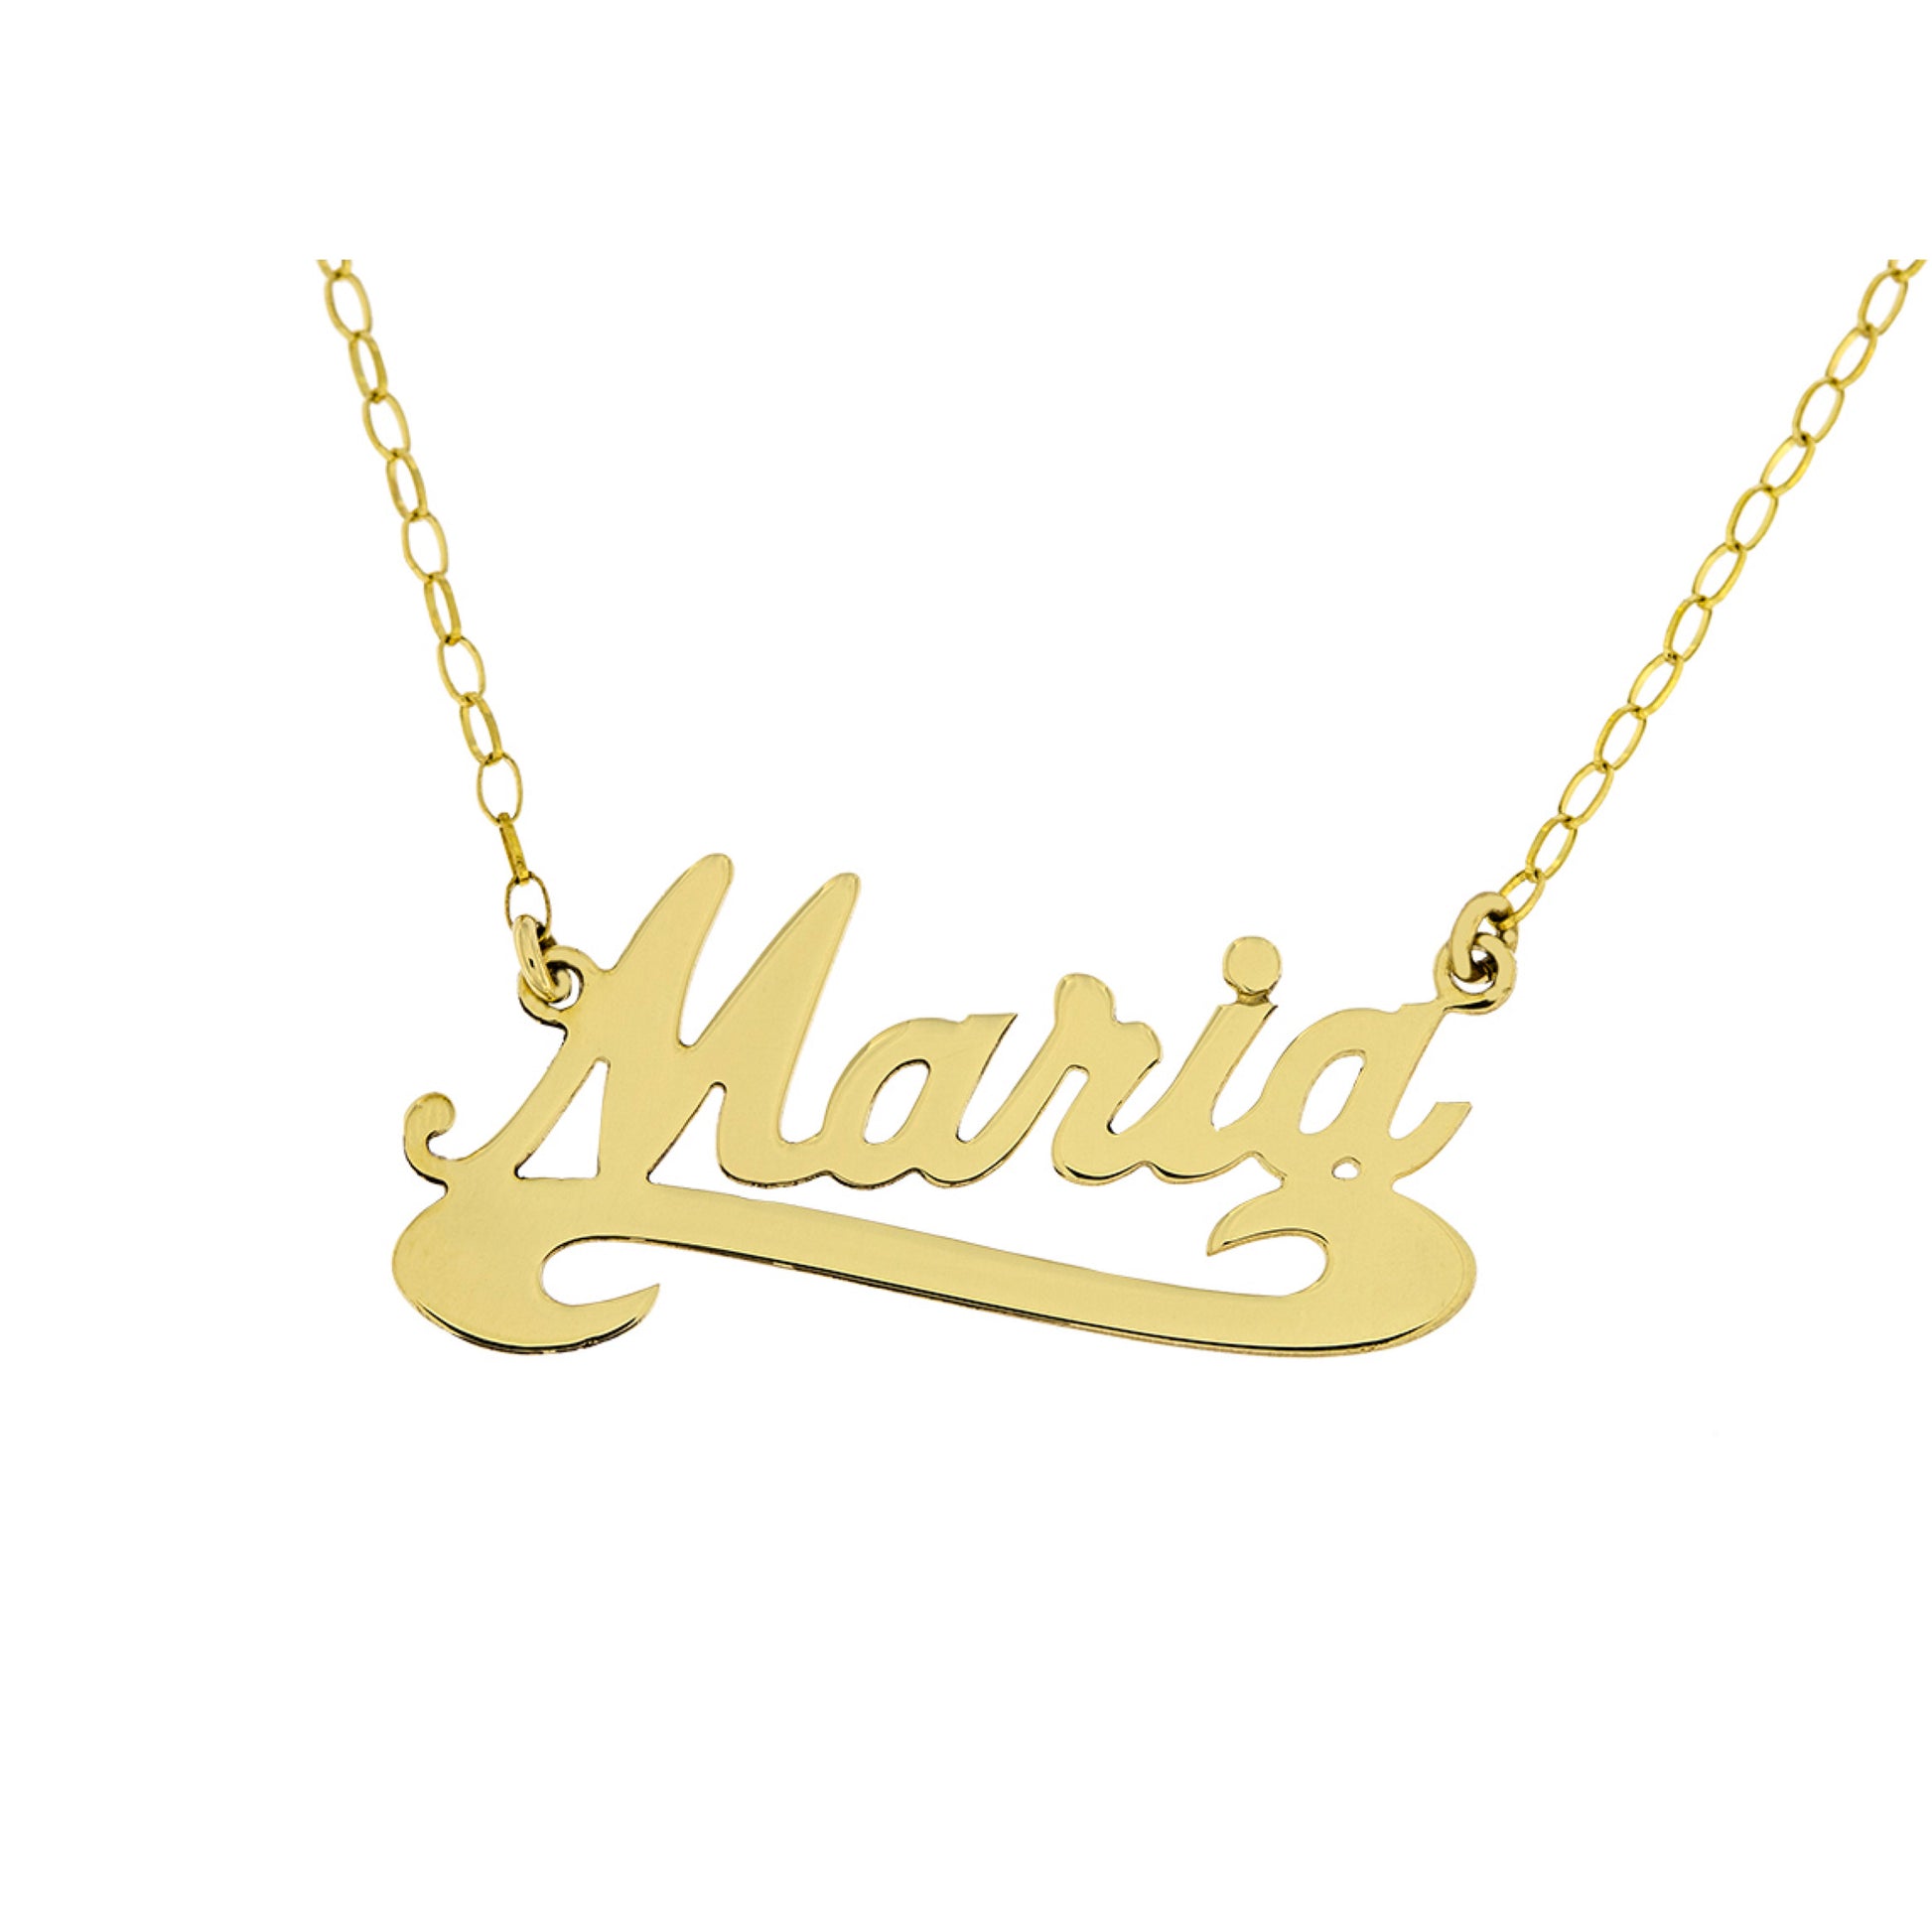 9ct Gold Name Plate Necklace with Underline - John Ross Jewellers